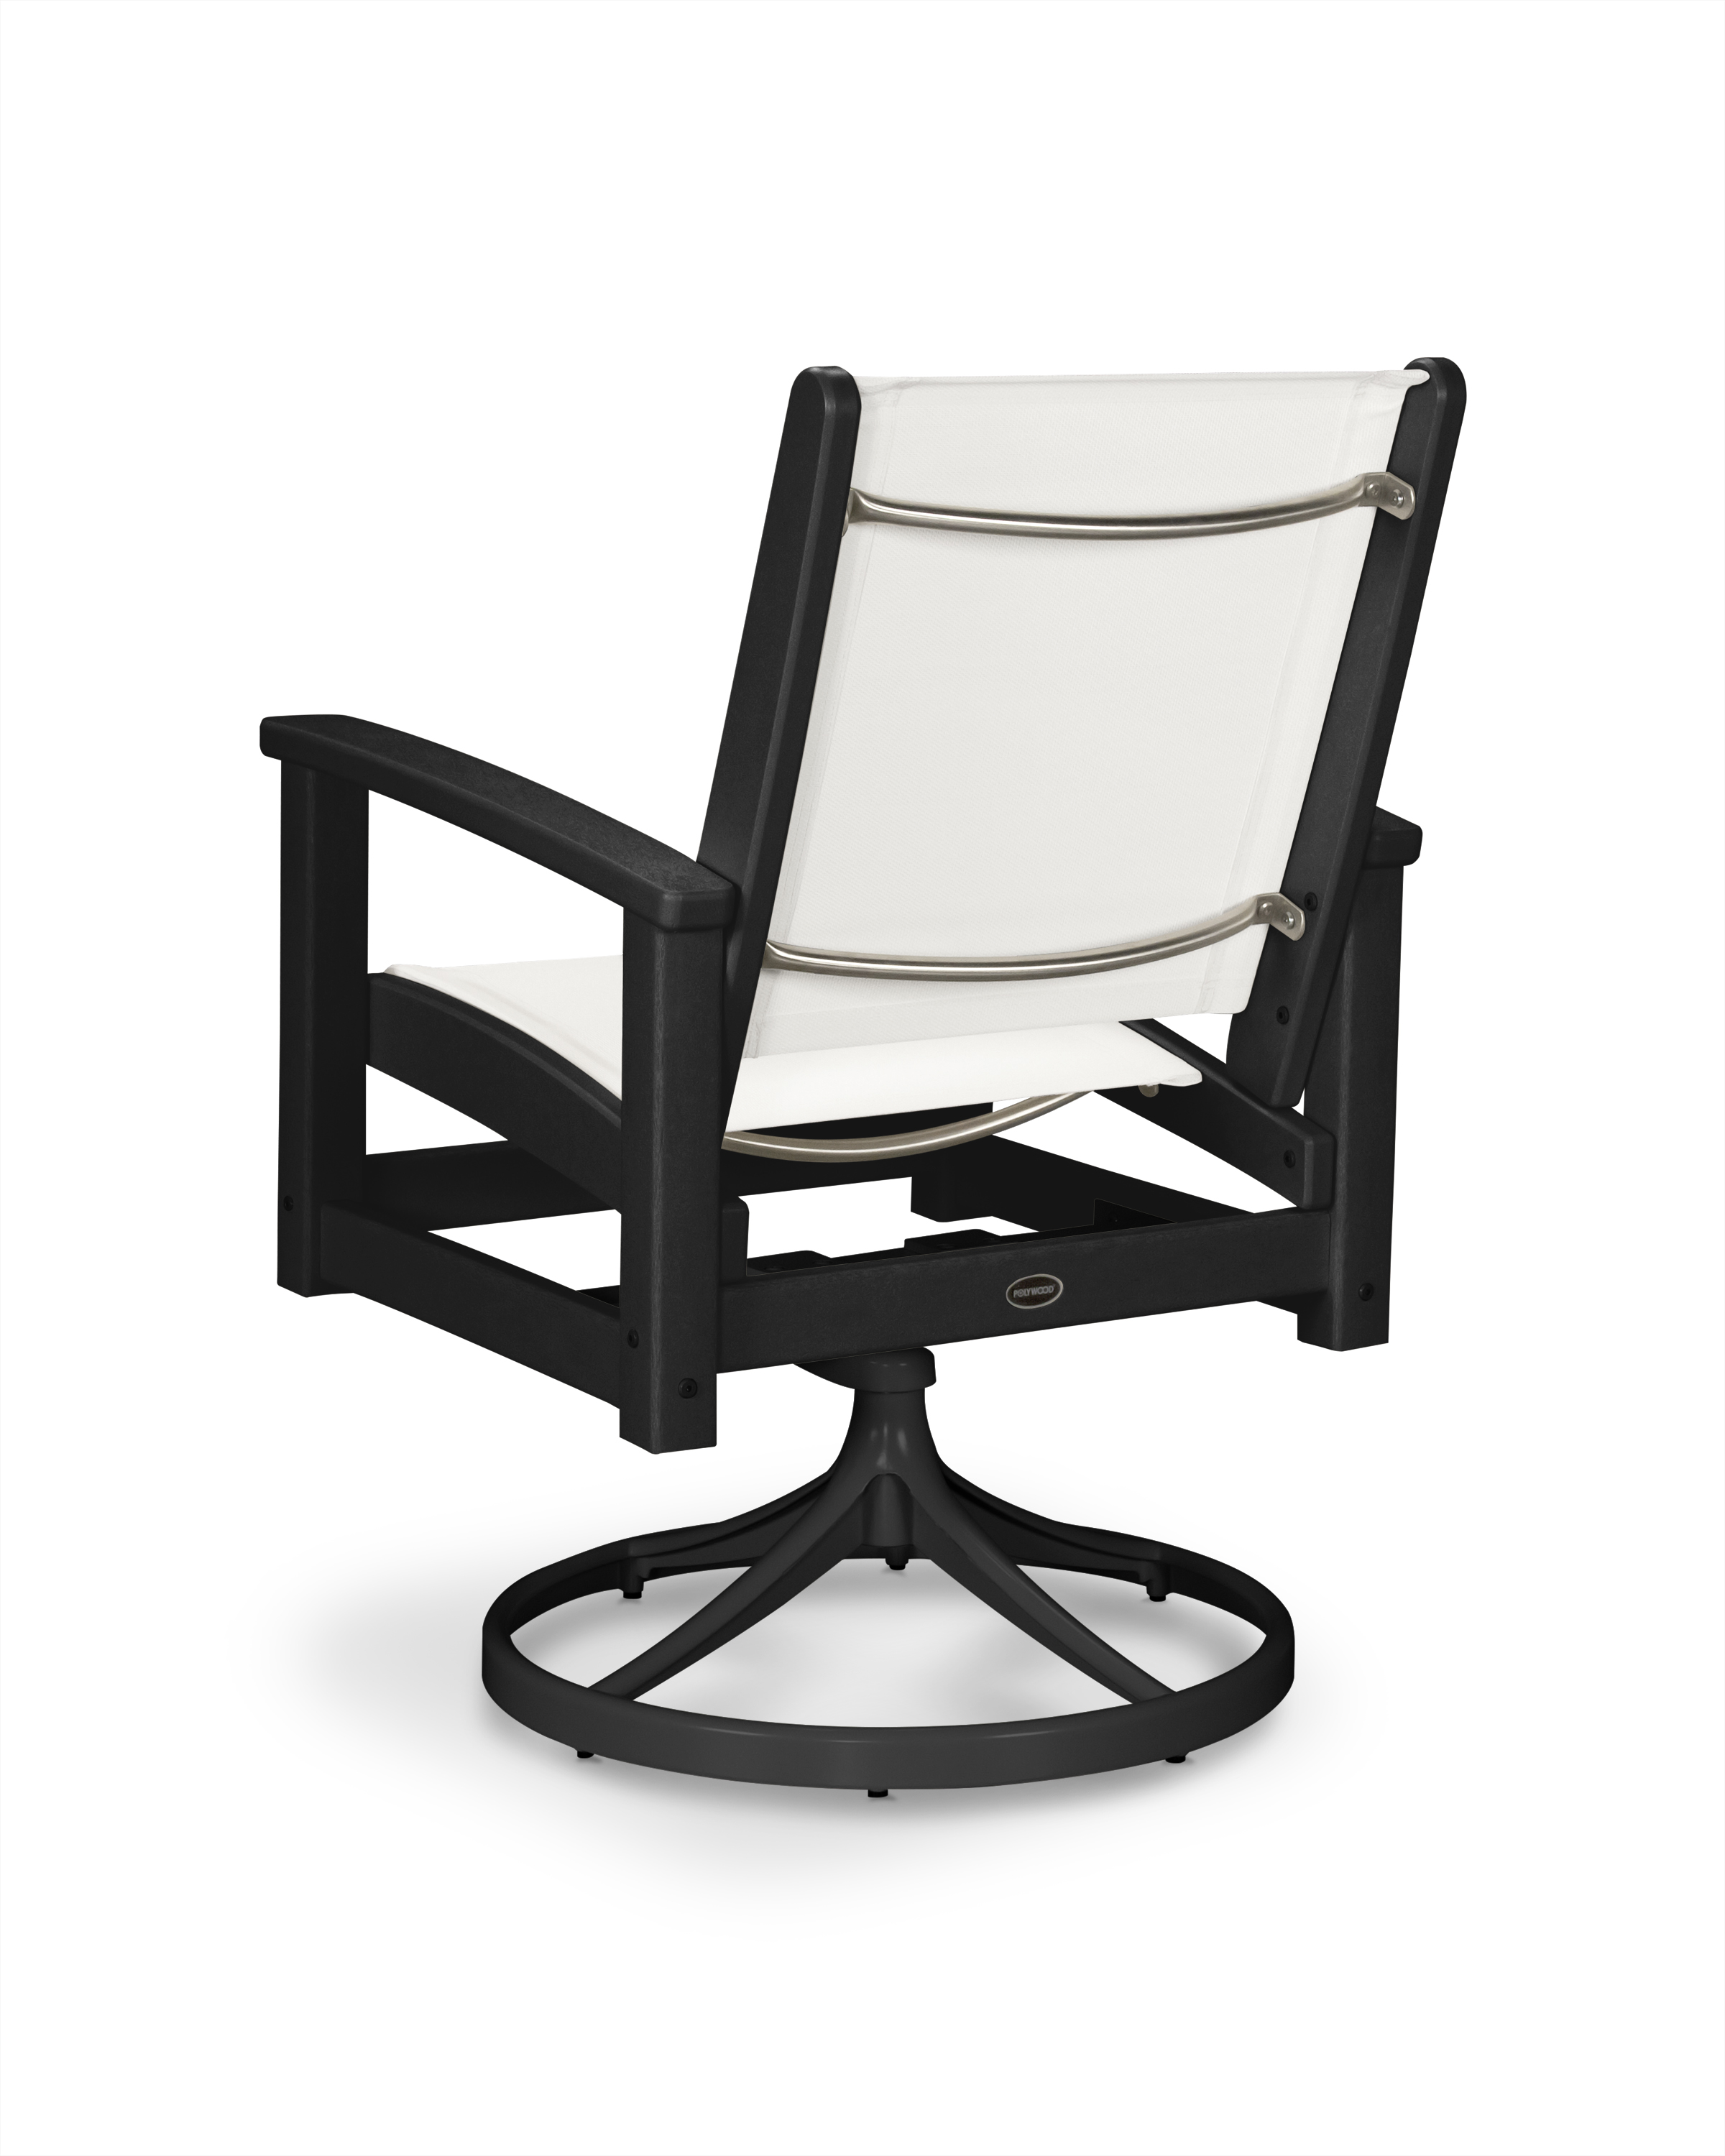 Enjoy Optimal Comfort In The Coastal Swivel Rocker With Its Curved Armrests And Breathable Fabric Sling Seat. This All-weather Rocker Features A Solid Frame And An Aluminum Base With 360-degree Spin Capabilities. Constructed Out Of Durable Polywood